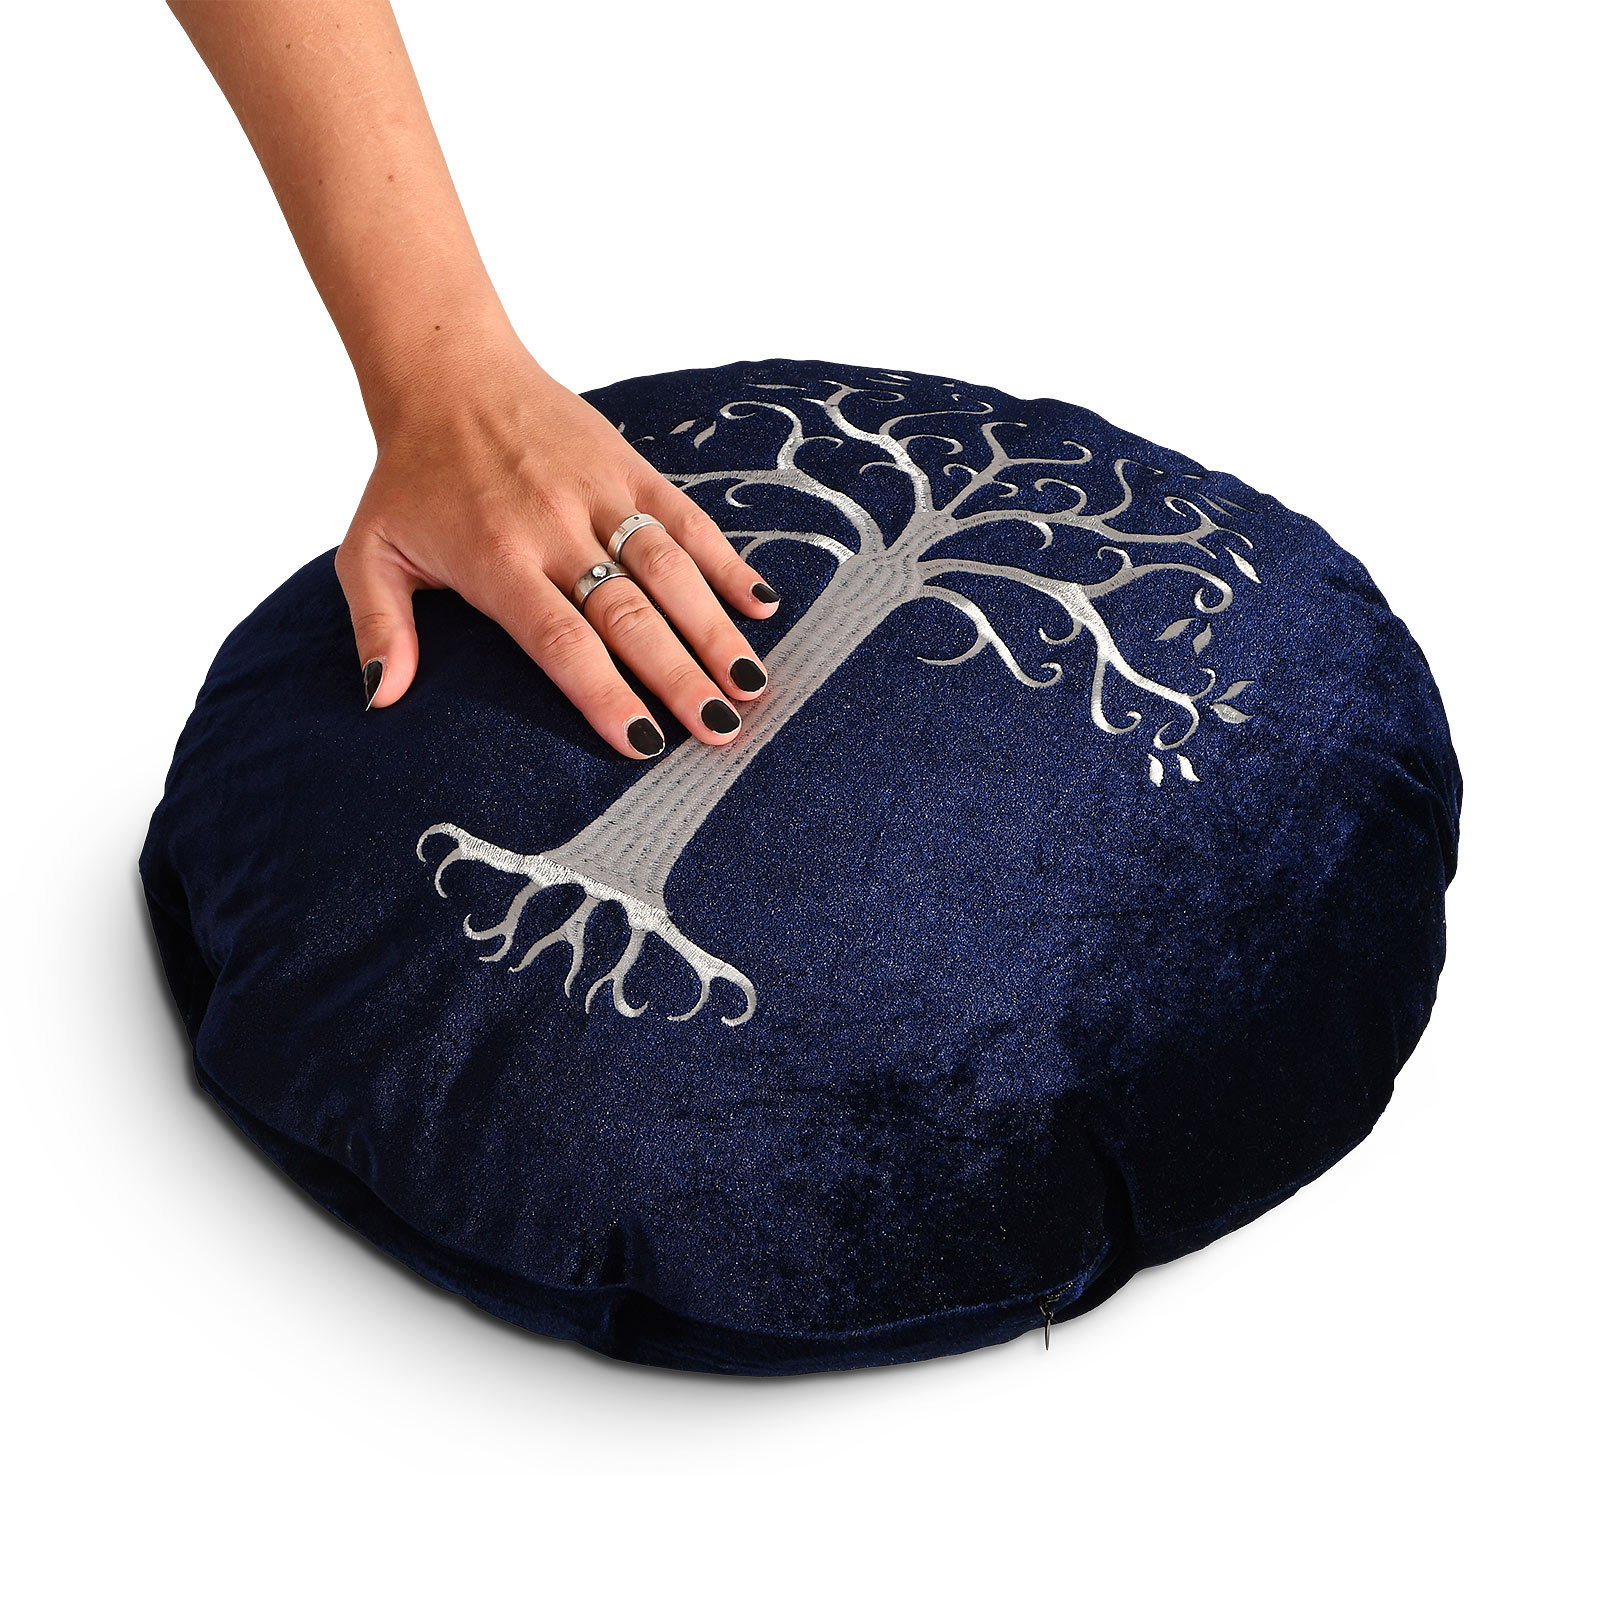 Lord of the Rings - White Tree of Gondor Cushion